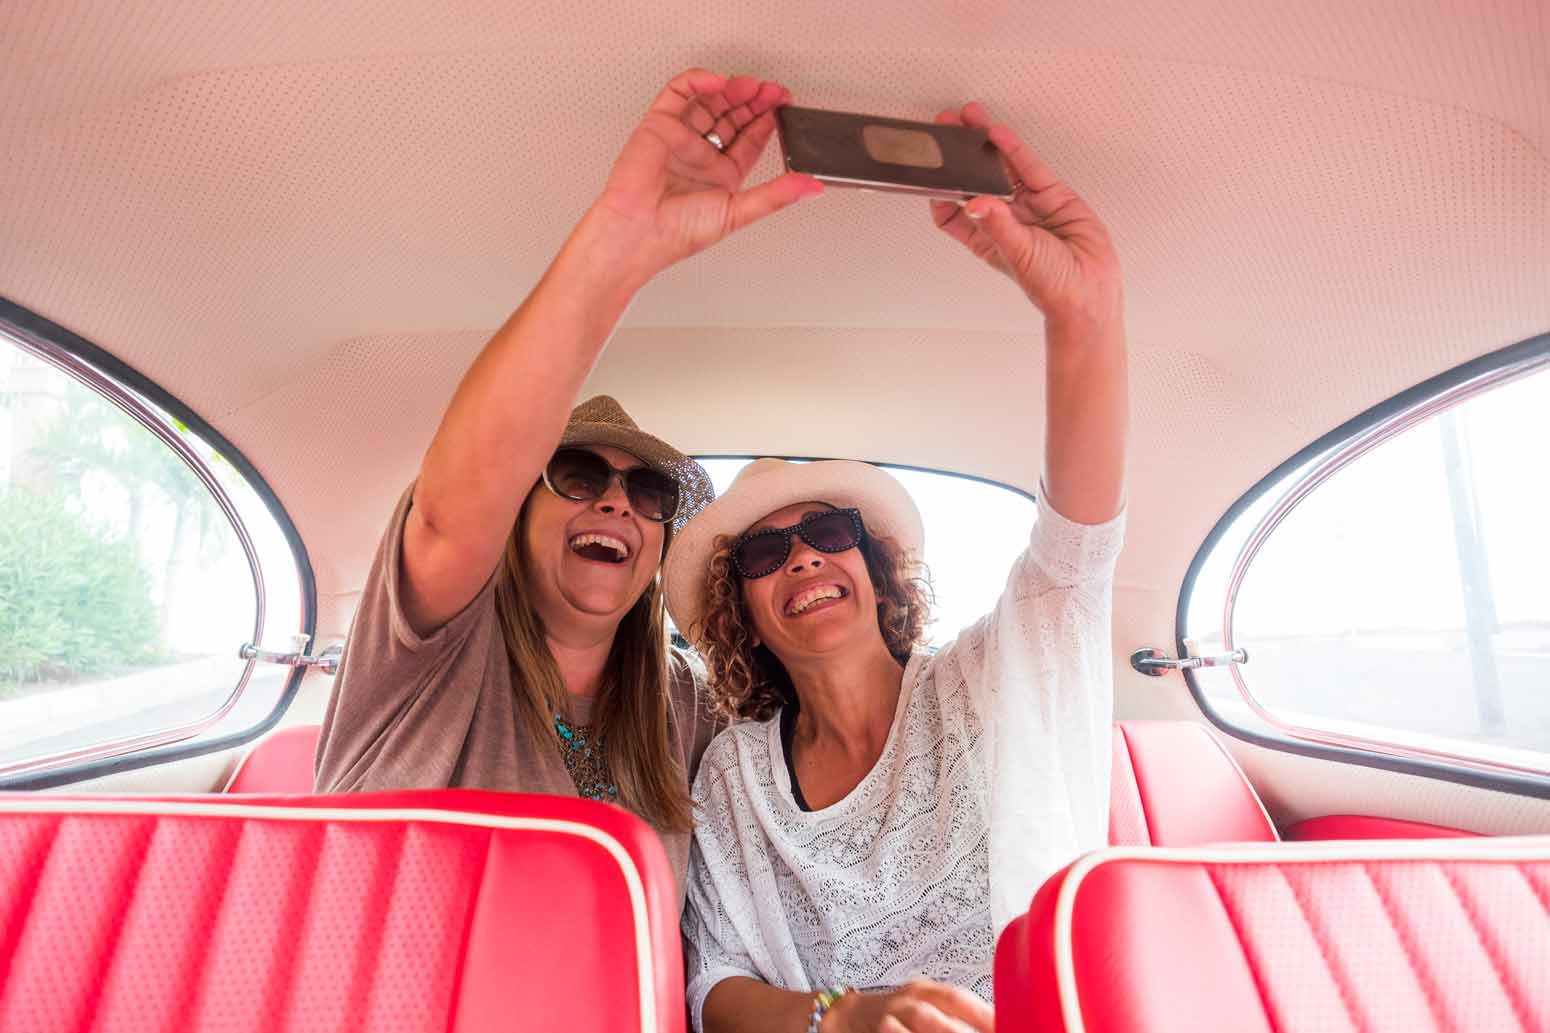 two middle aged women wearing sunglasses taking a selfie in the backseat of a vintage car